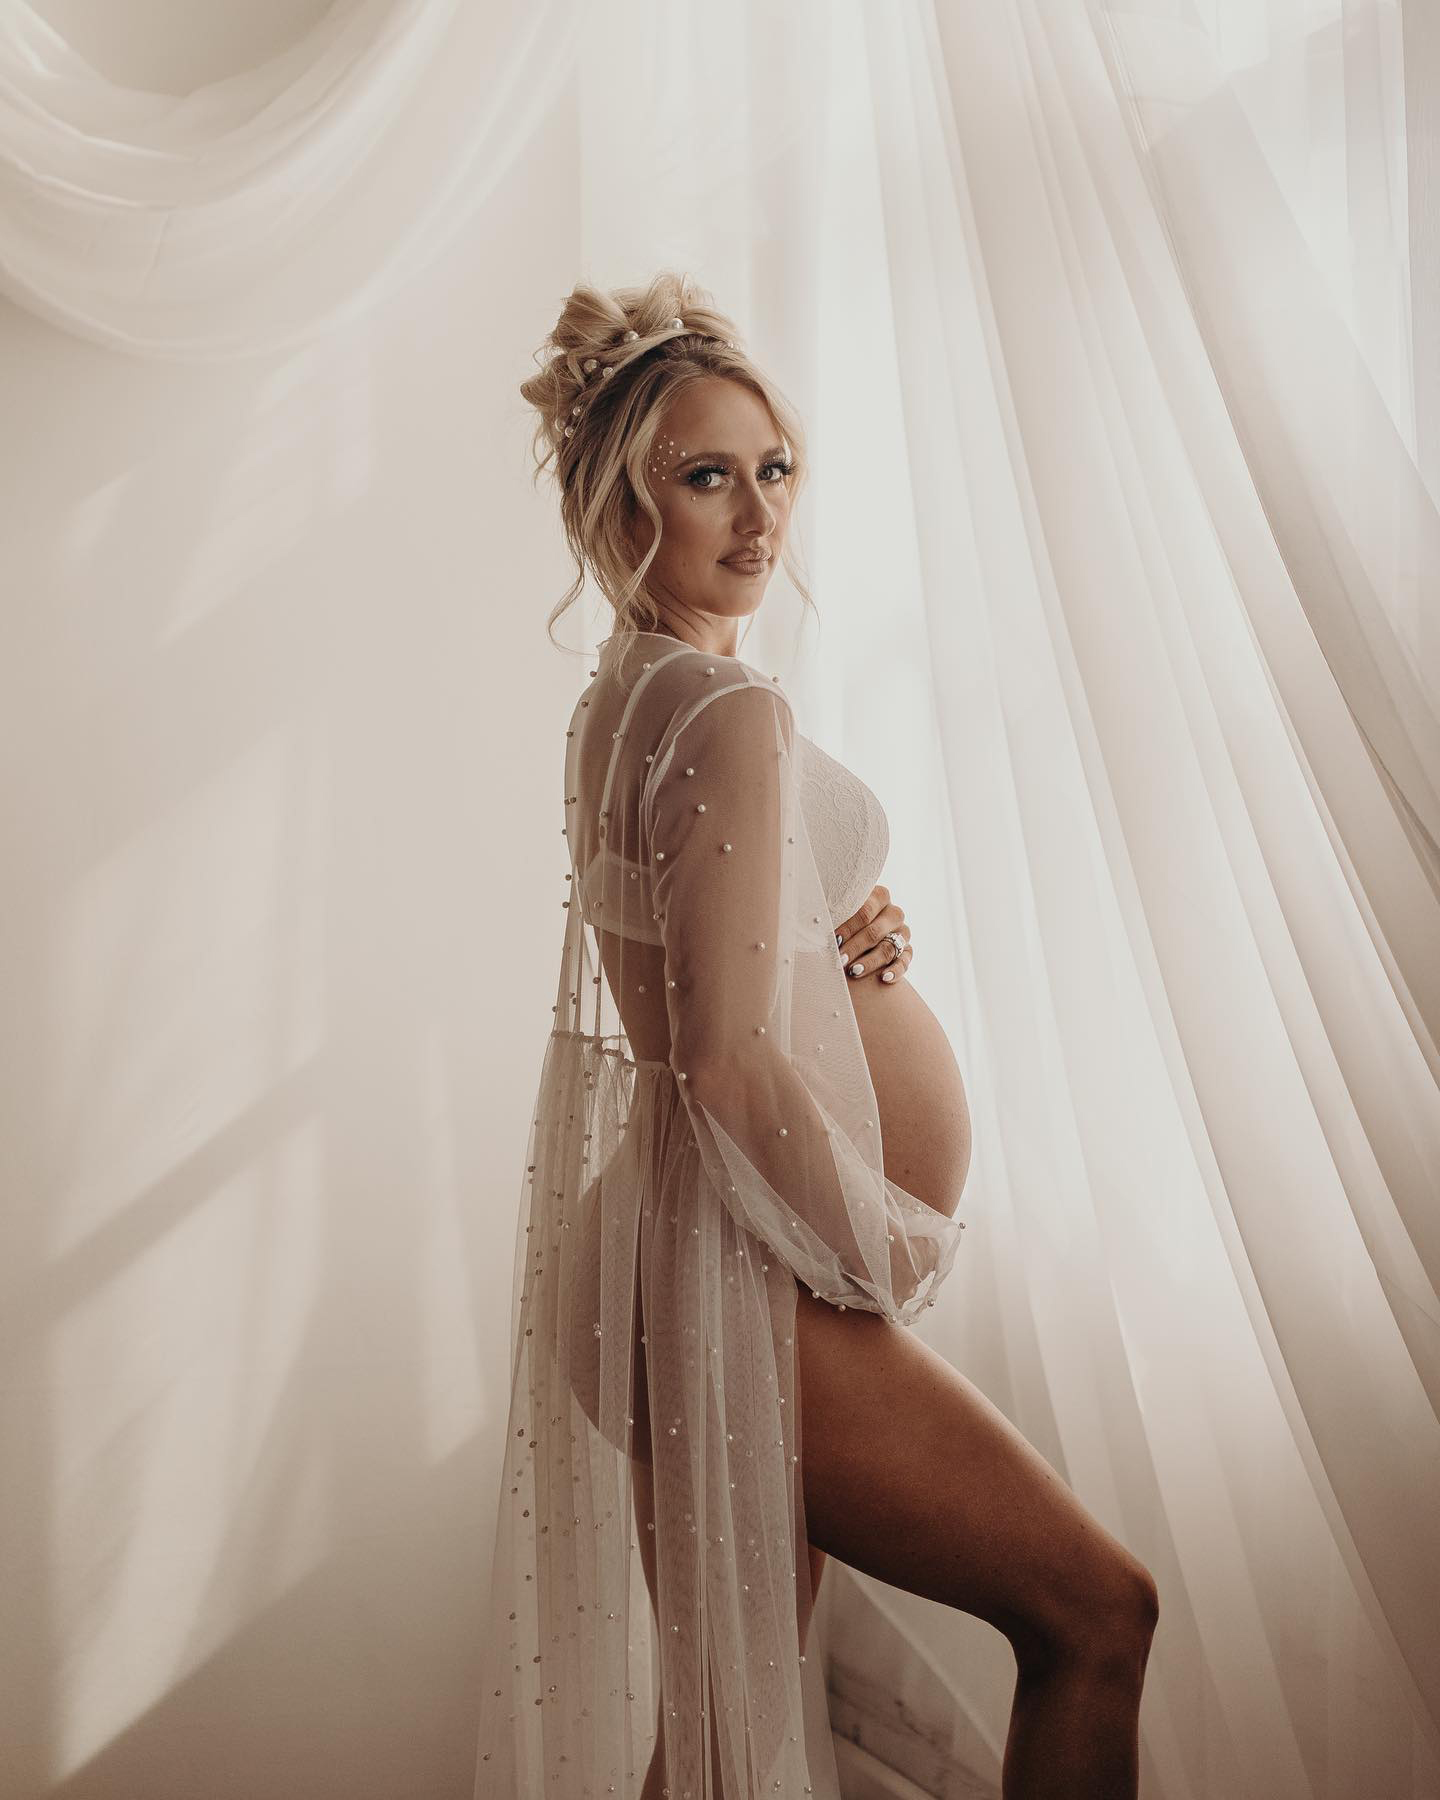 Brittany Matthews Embraced Body More This Pregnancy Pics photo